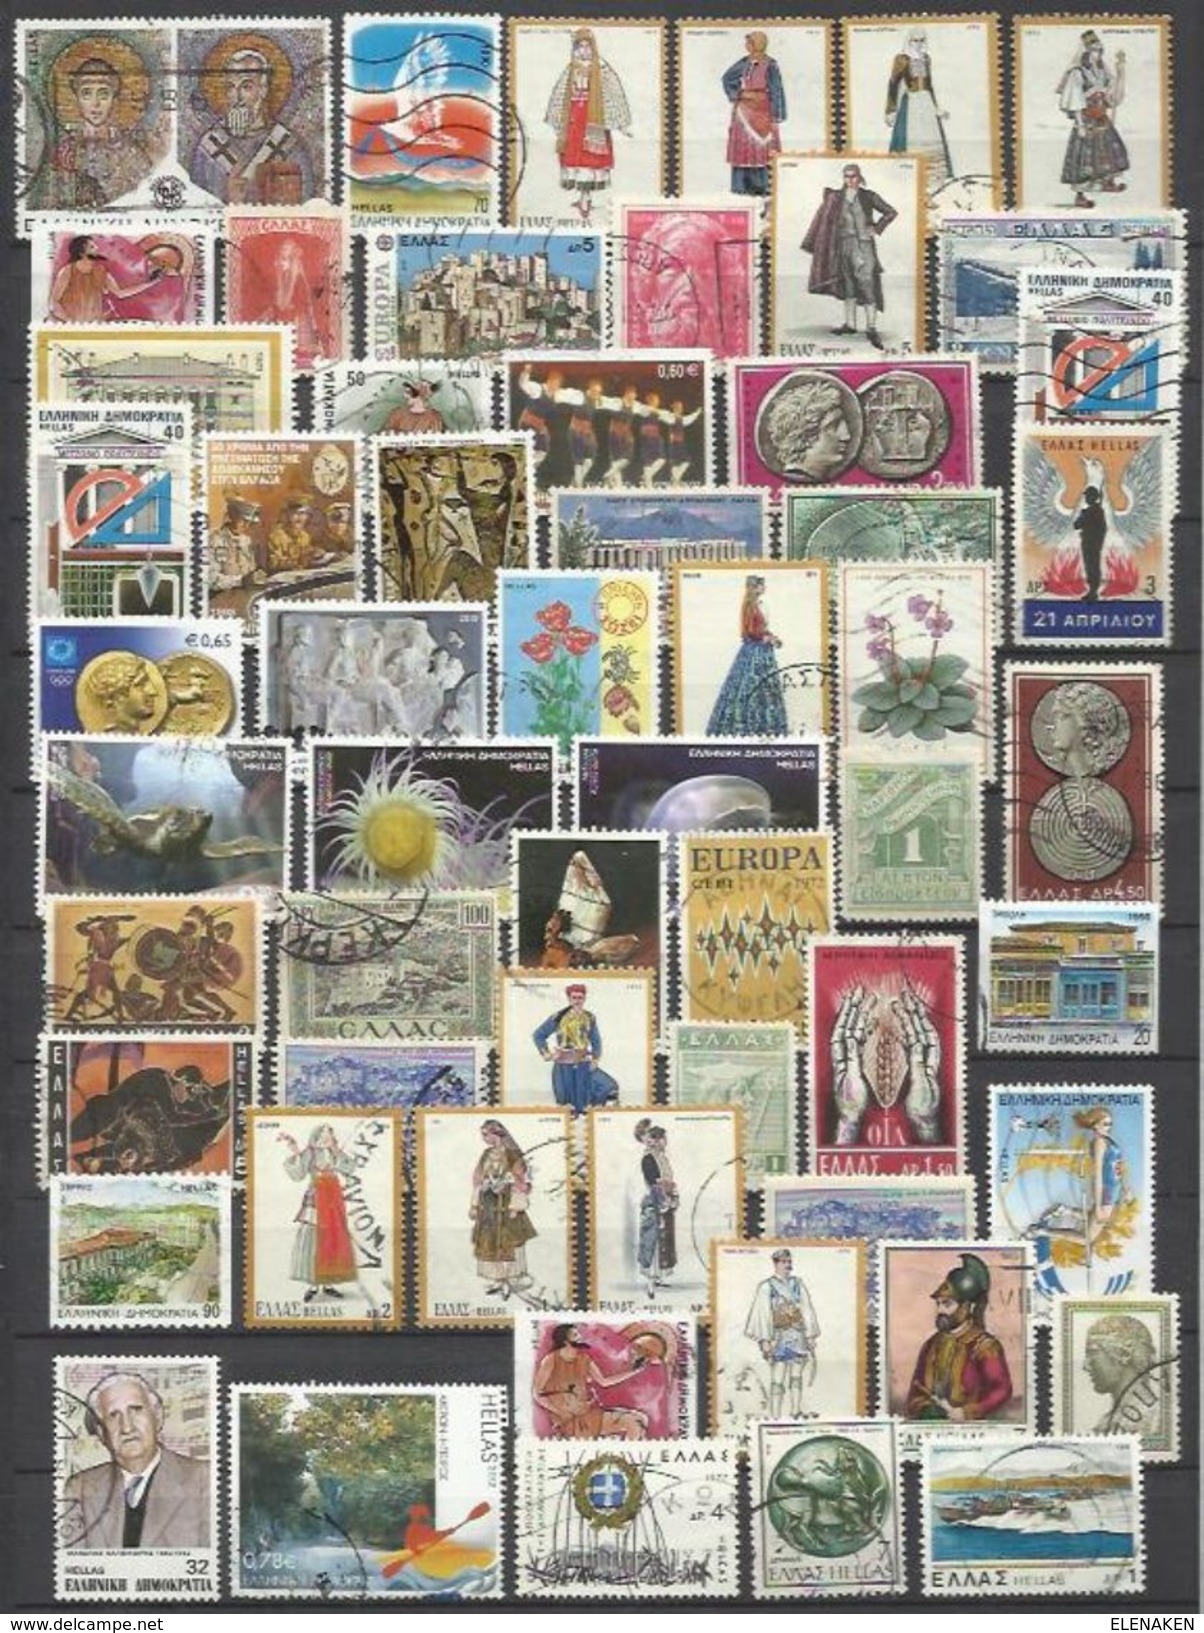 Q835-LOTE SELLOS GRECIA SIN TASAR,SIN REPETIDOS,ESCASOS. -GREECE STAMPS LOT WITHOUT PRICING WITHOUT REPEATED. -GRIECHEN - Collections